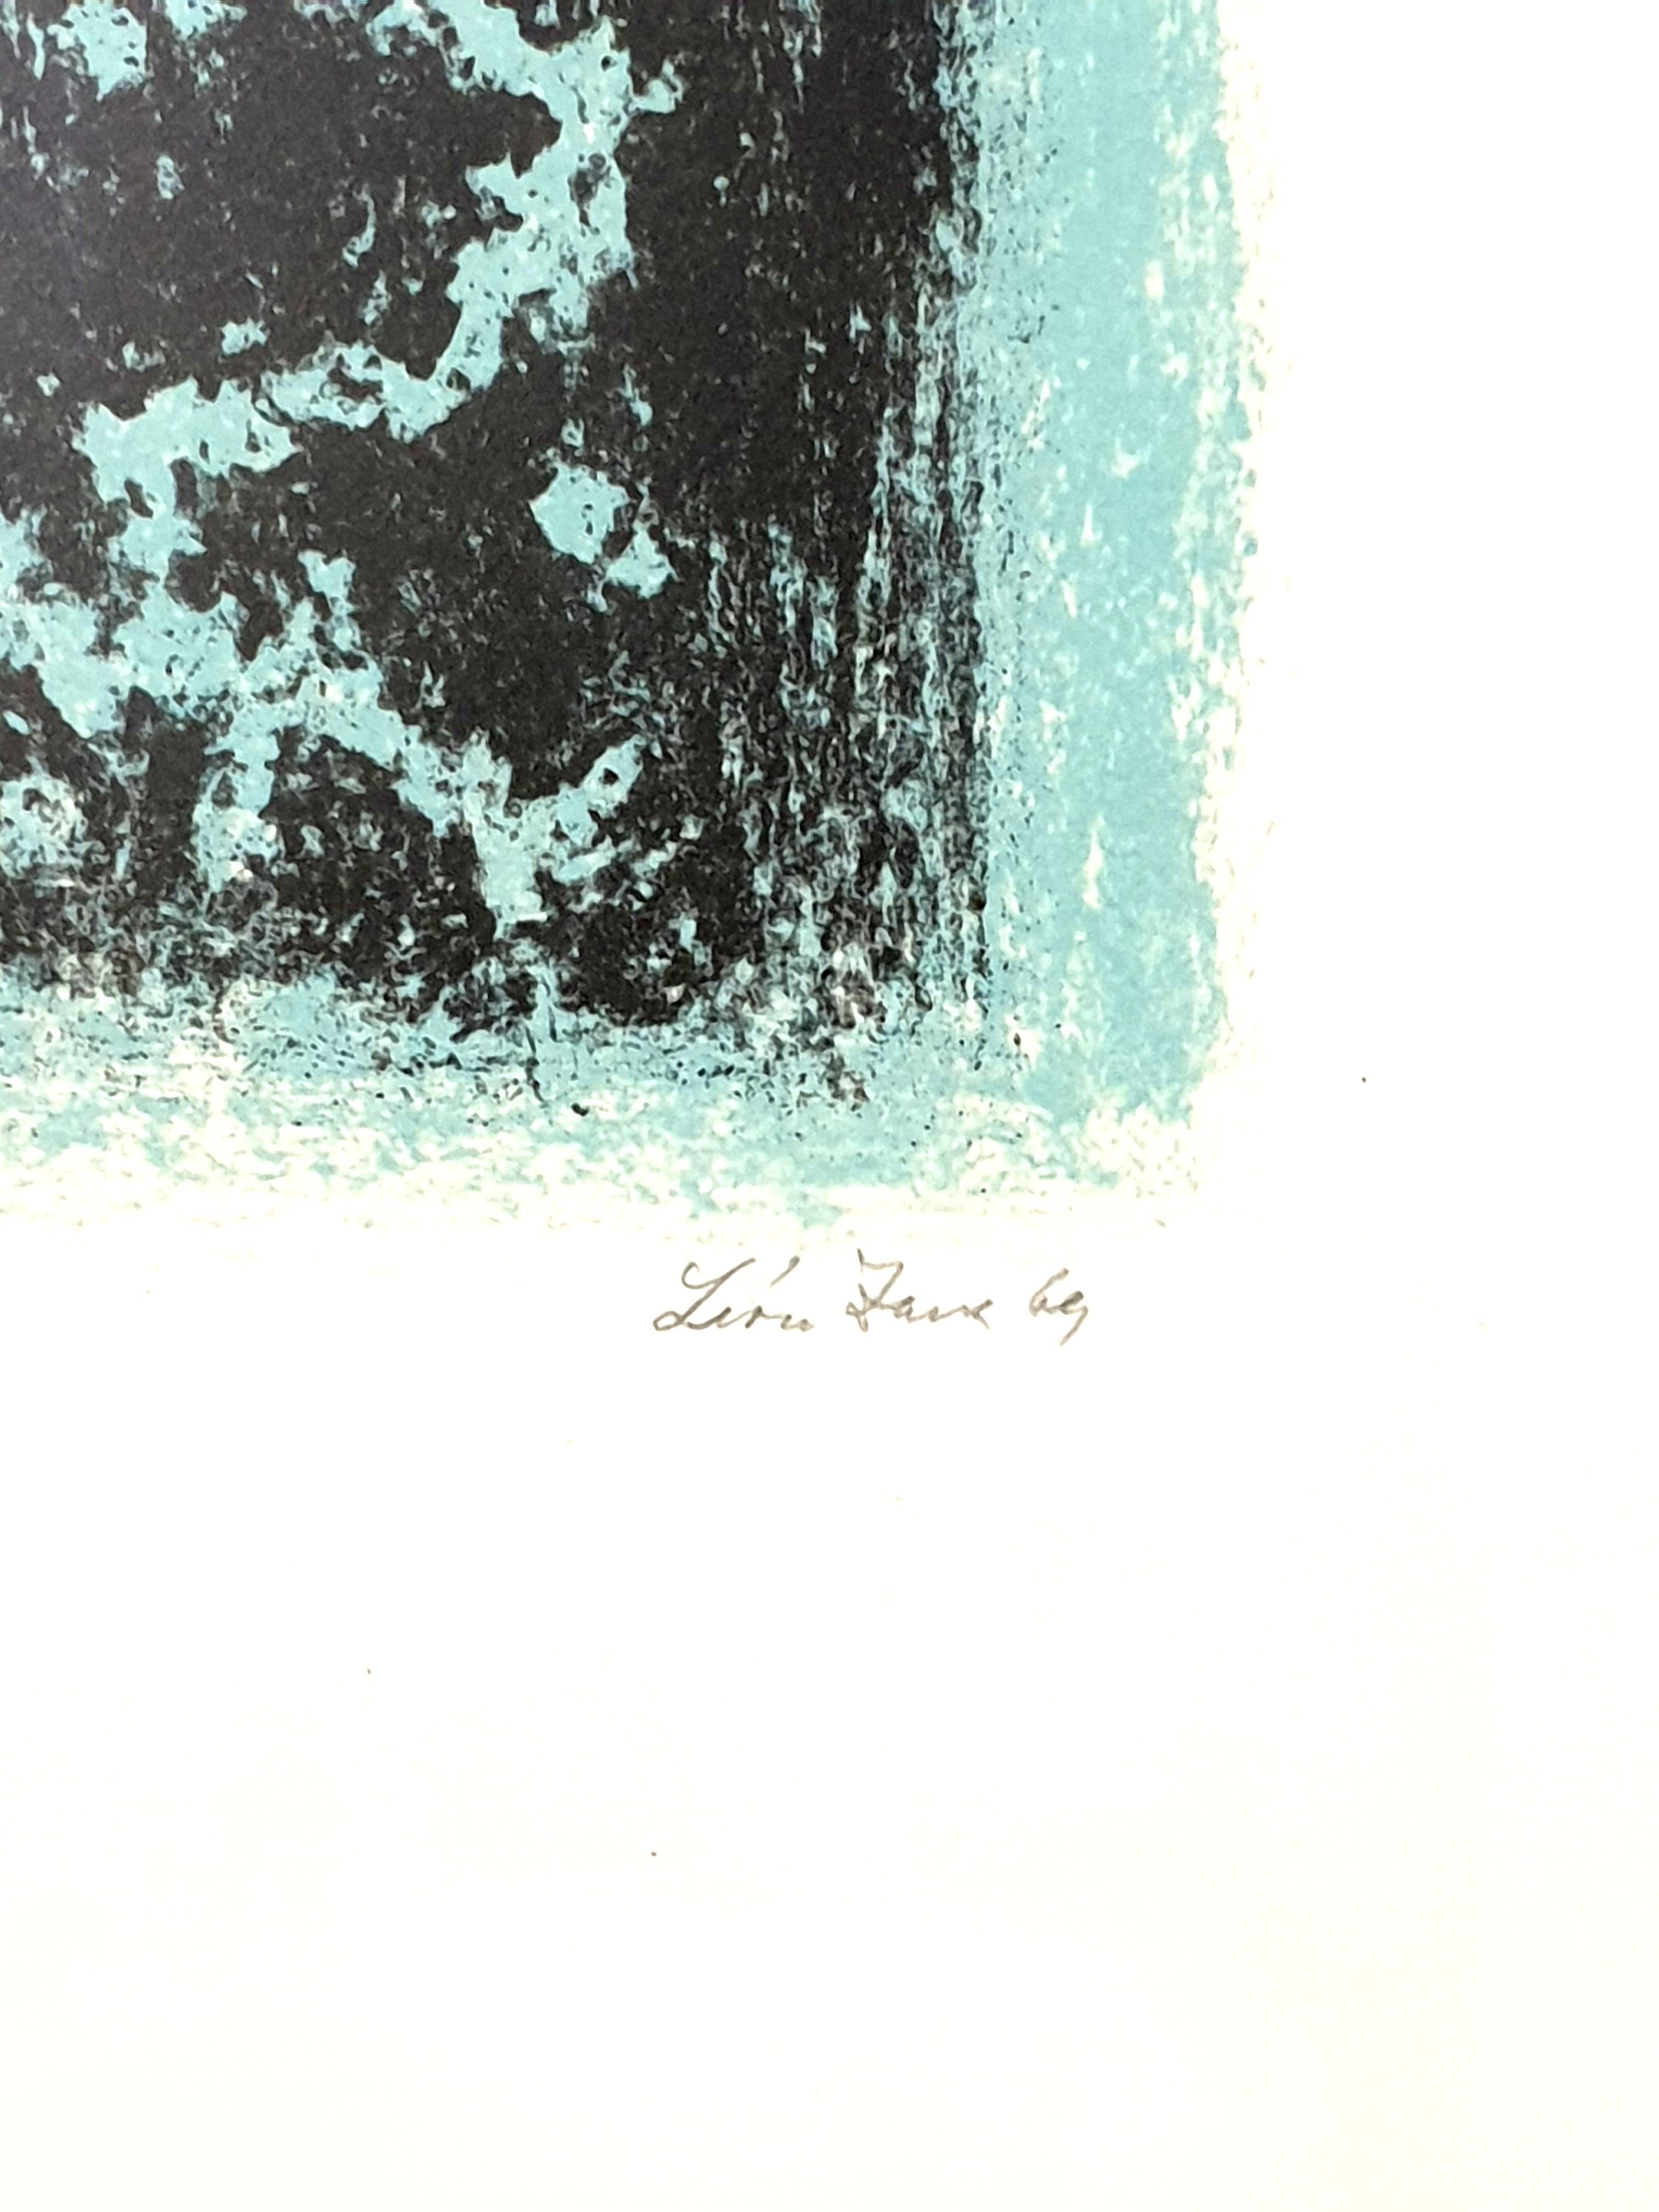 Léon Zack - Snow - Original Handsigned Lithograph
1969
Handsigned in pencil and numbered
Edition of 22
32.5 x 25 cm

Léon Zack (1892-1980)
Léon Zack was a Russian émigré who became a leading exponent of the Abstraction Lyrique movement, which was